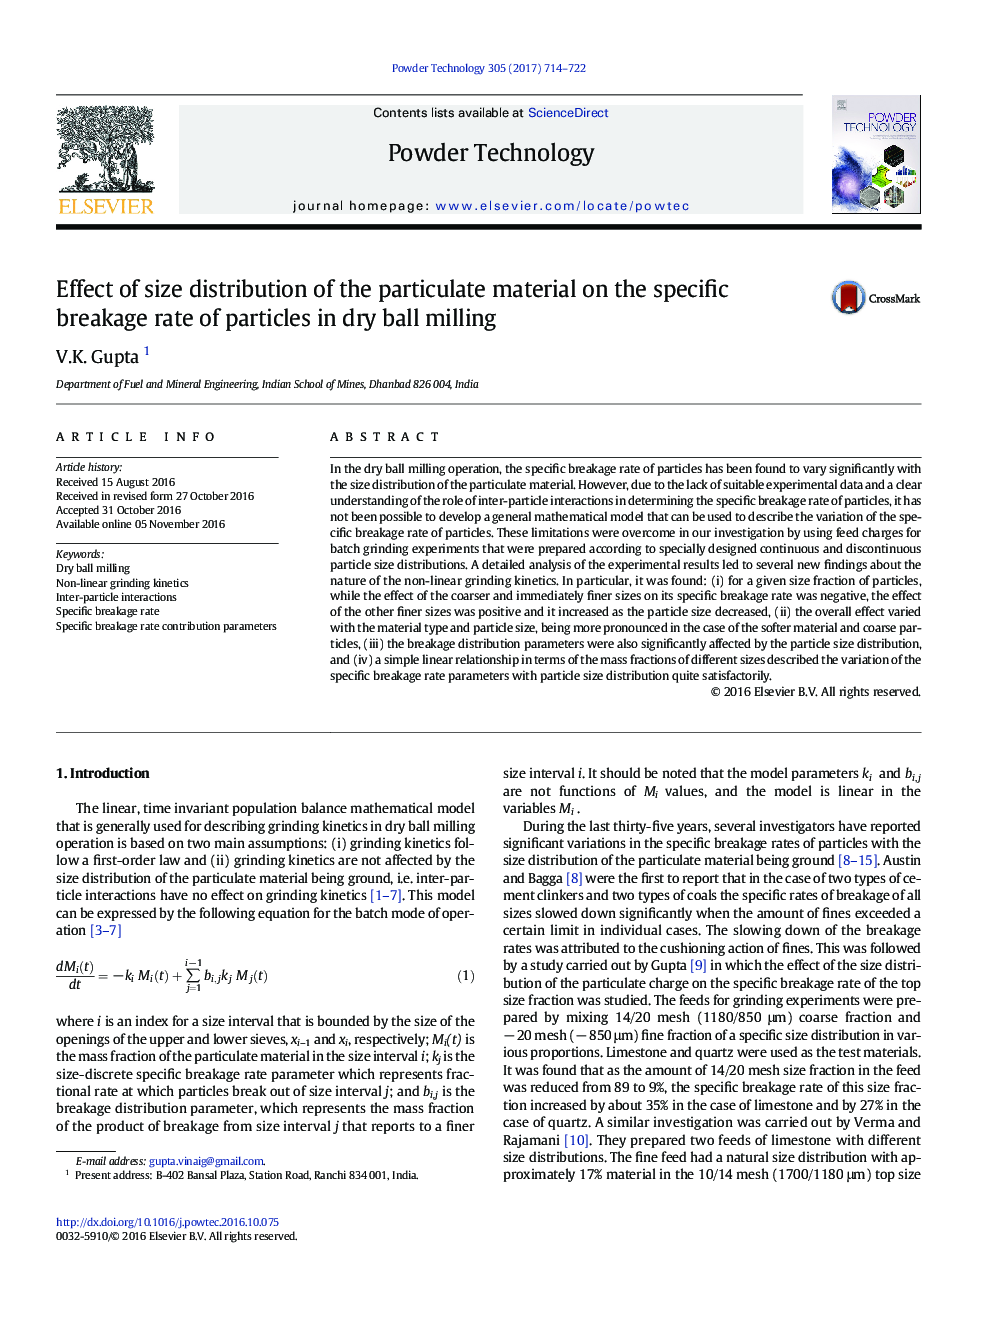 Effect of size distribution of the particulate material on the specific breakage rate of particles in dry ball milling